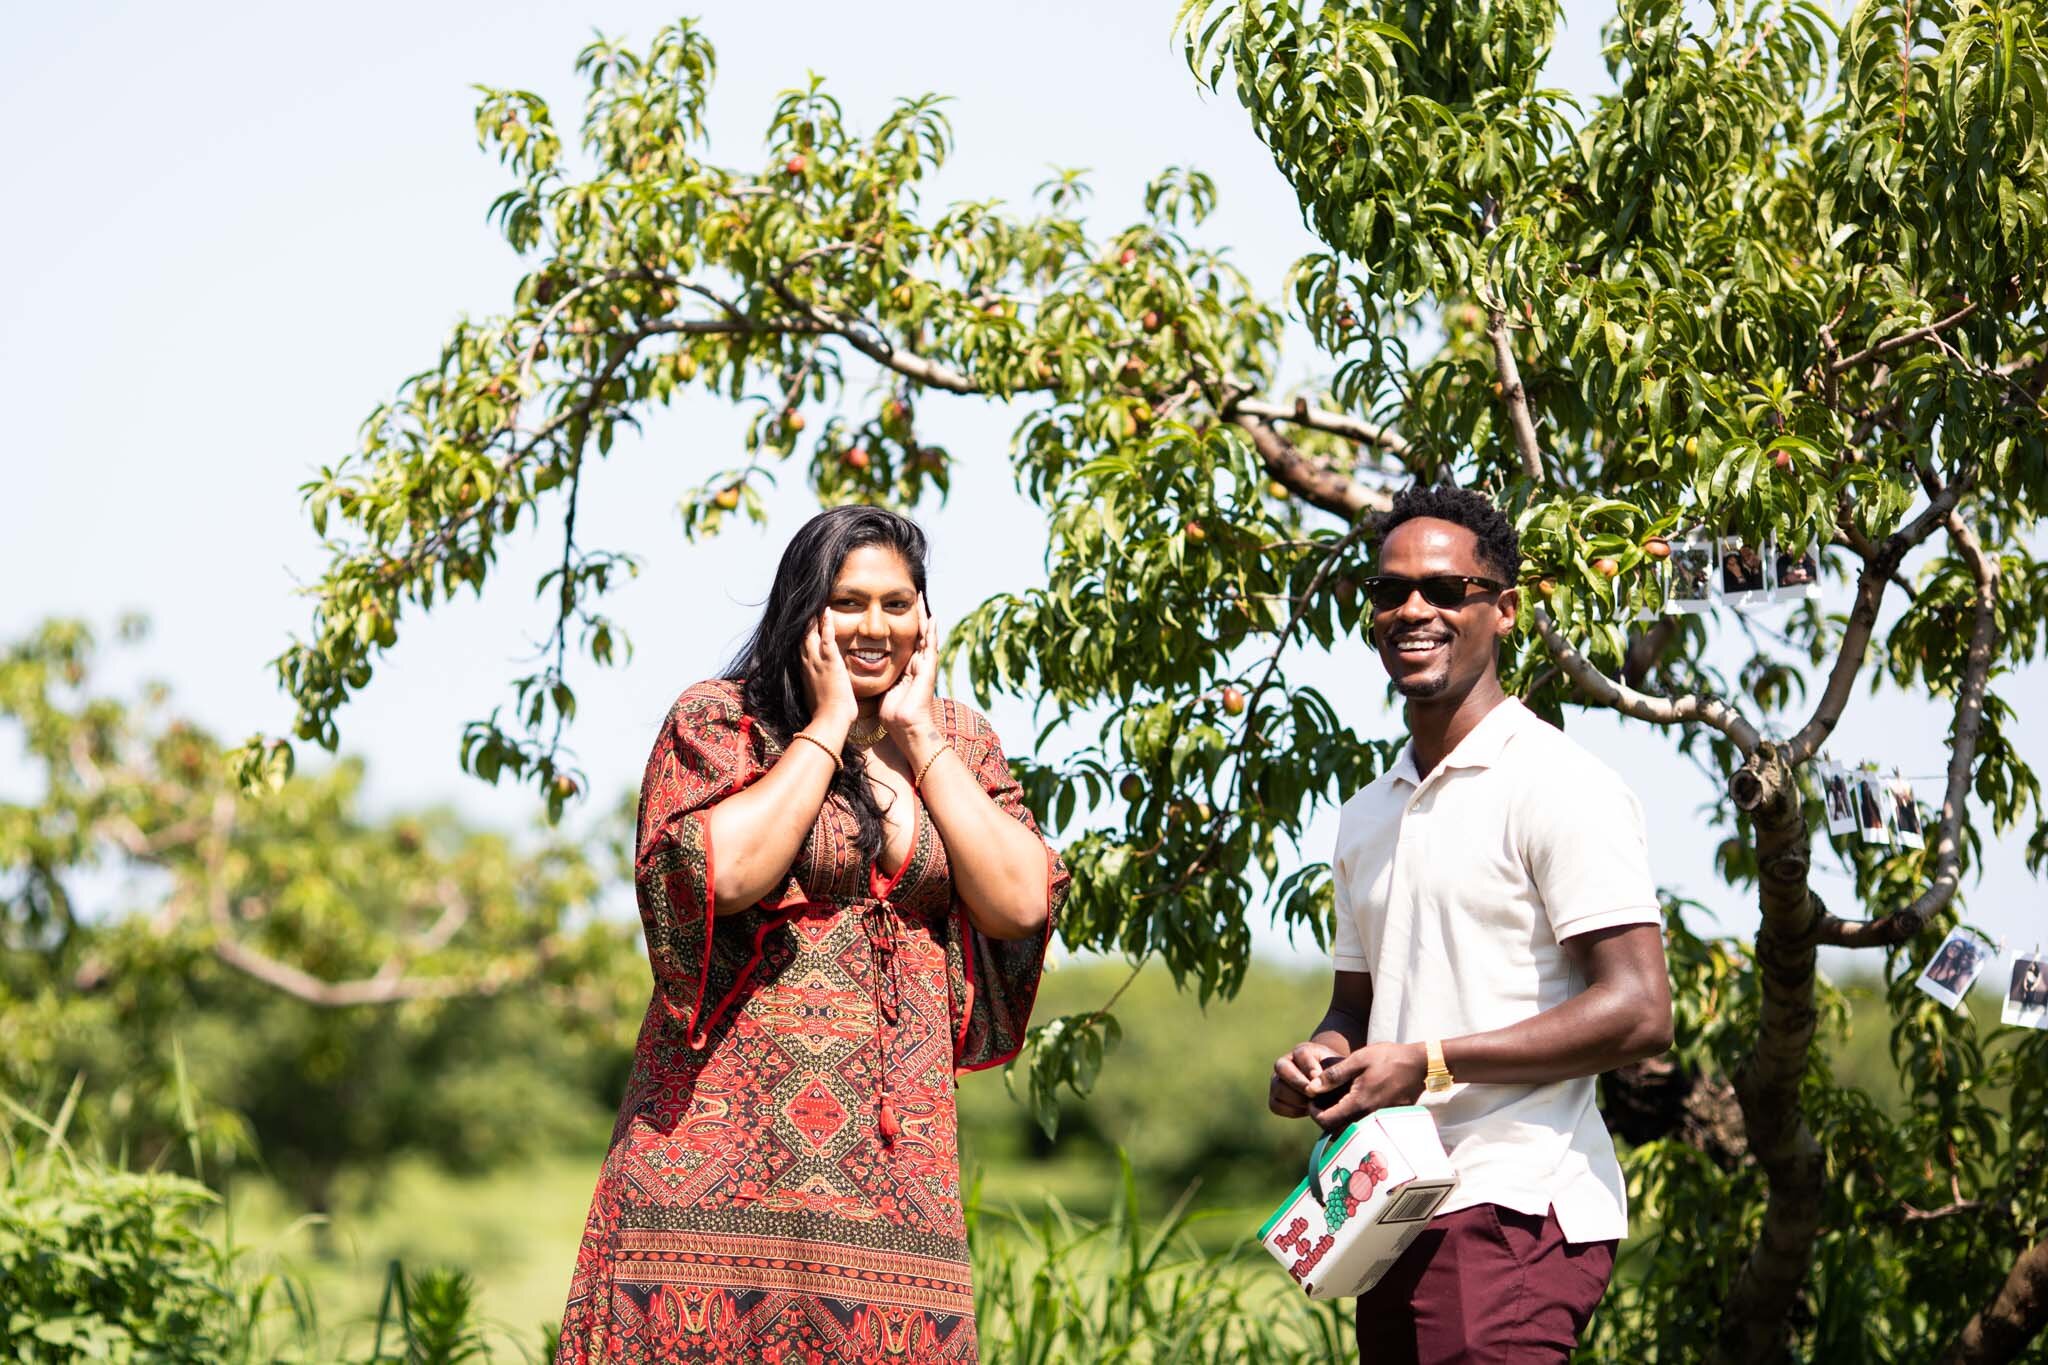 happy faces after surprise wedding proposal at Cherry Avenue Farms Ontario.jpg